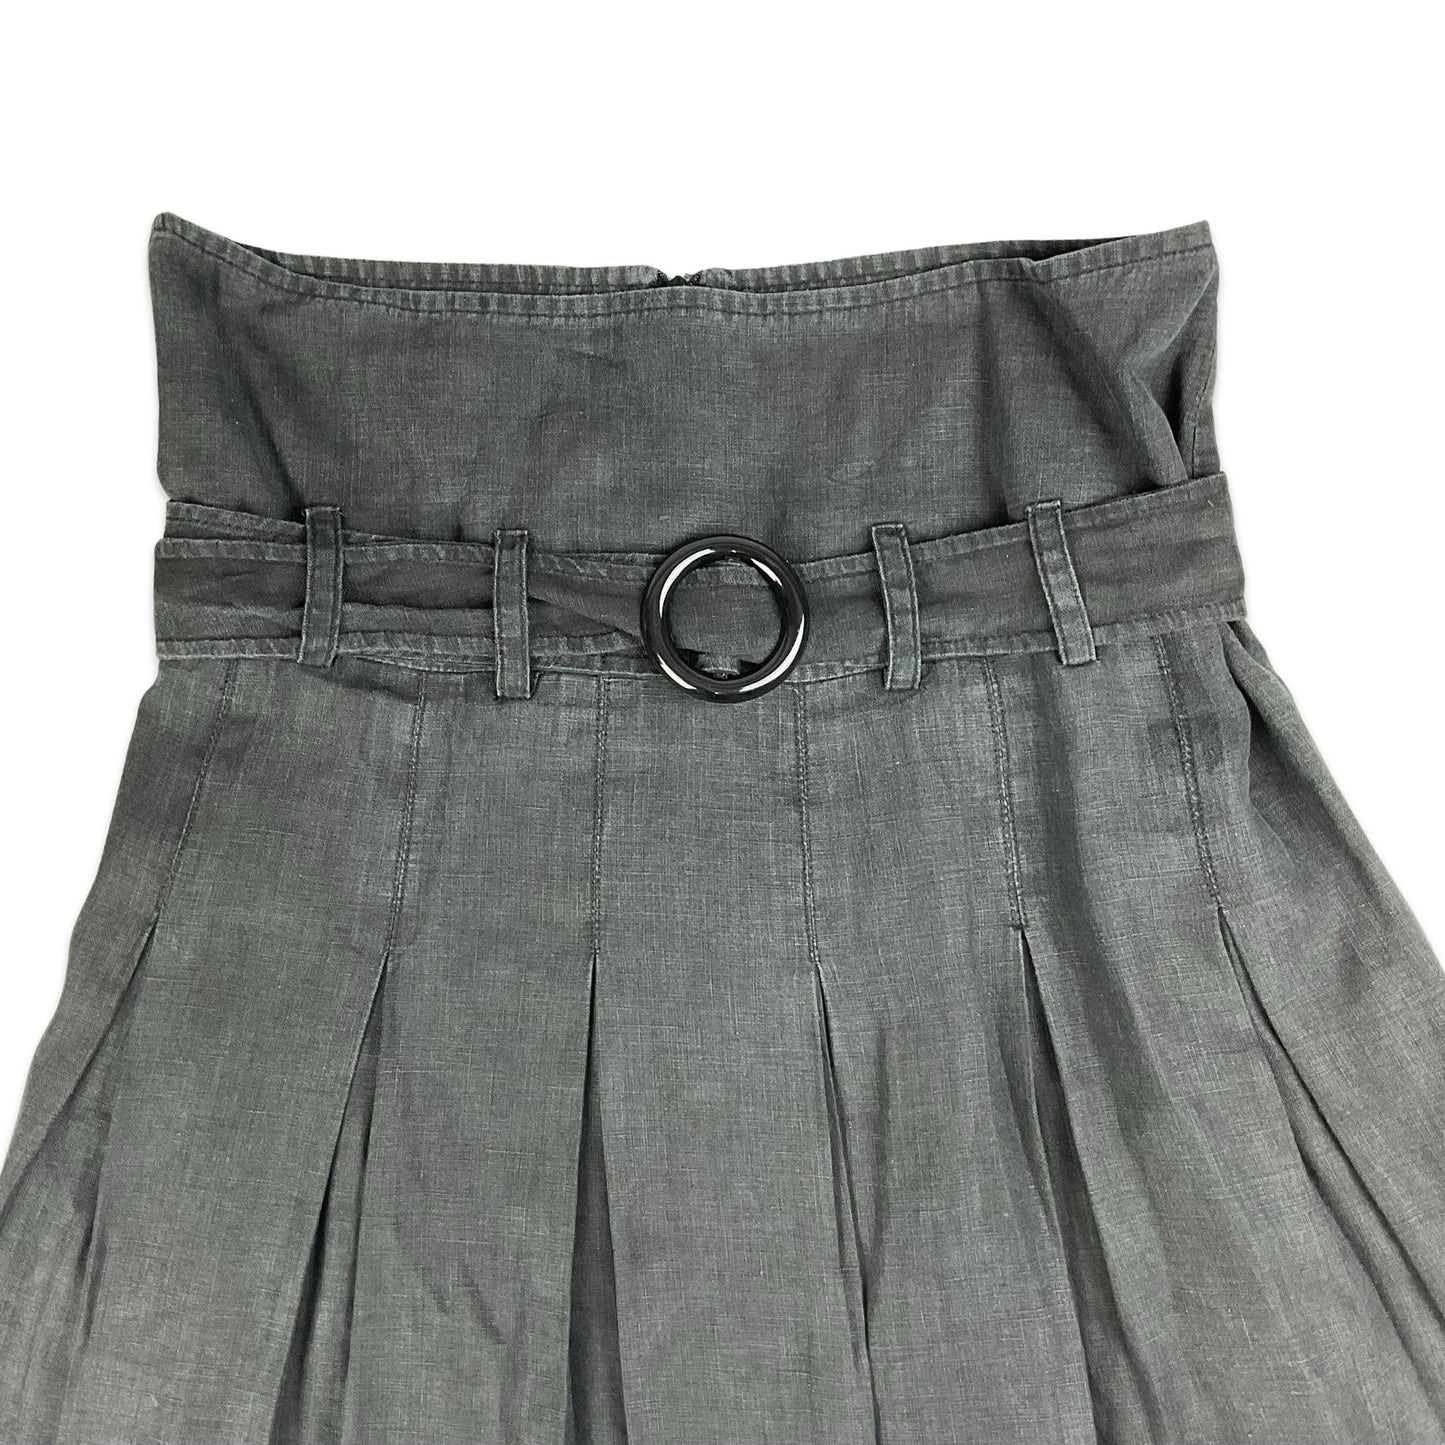 90s Black High Waisted Pleated Skirt with Belt